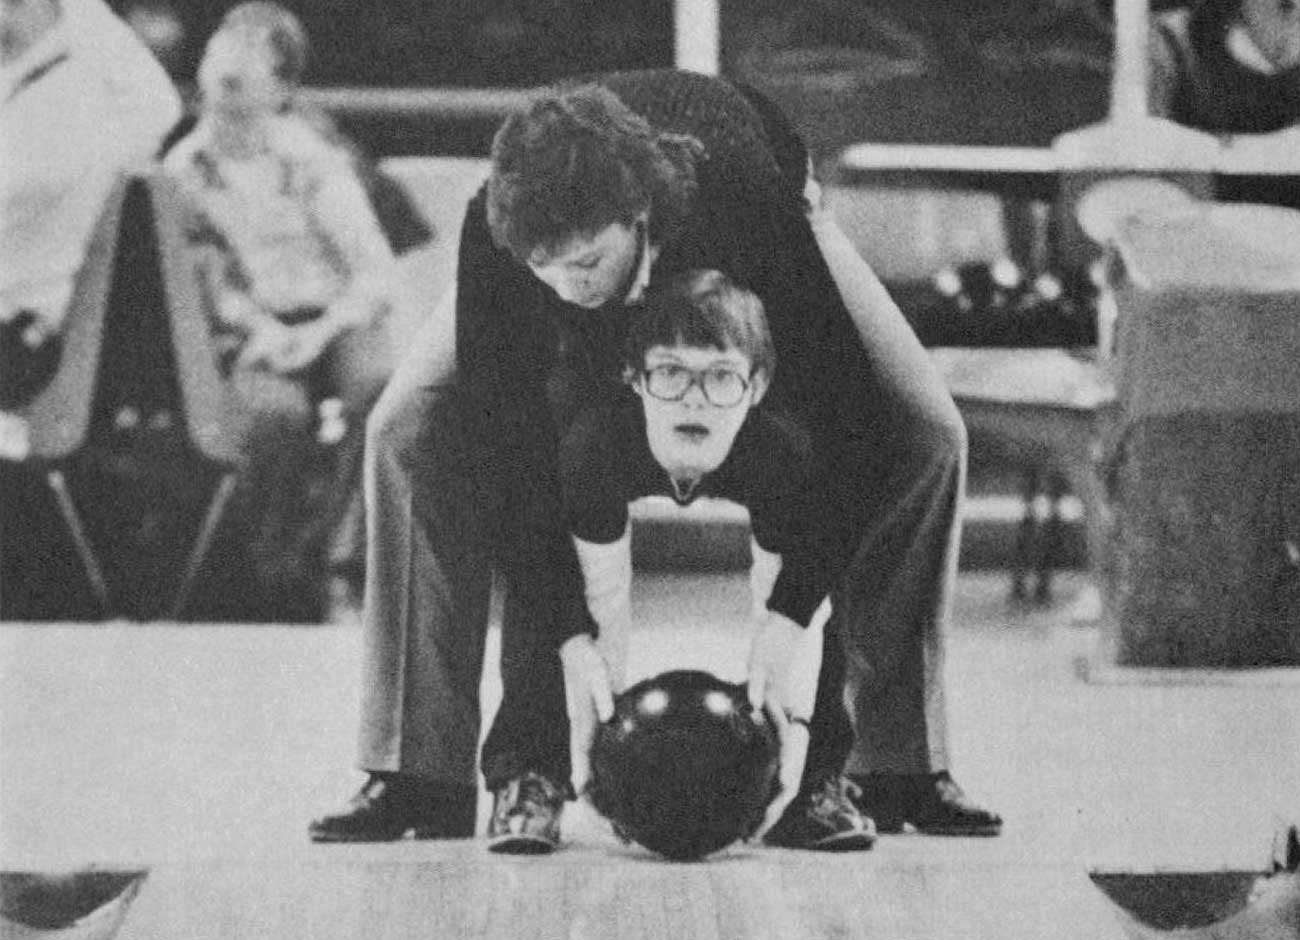 a black and white image of a USU student helping a child with special needs bowl